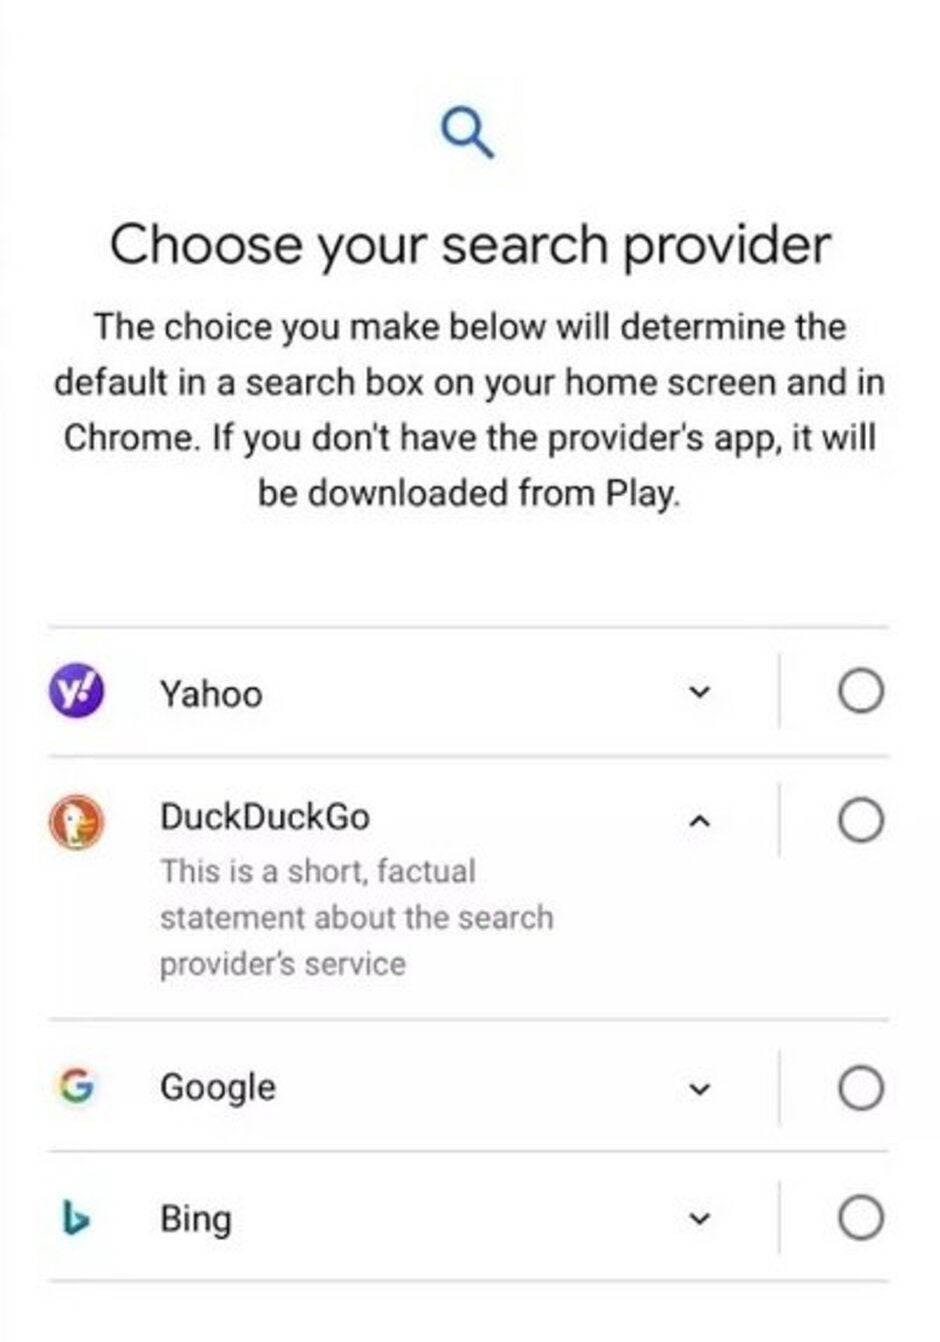 In the EU, Google asks Android users to select a default search engine based on a bidding system - Google gives European Android users the option of voting for a default search engine